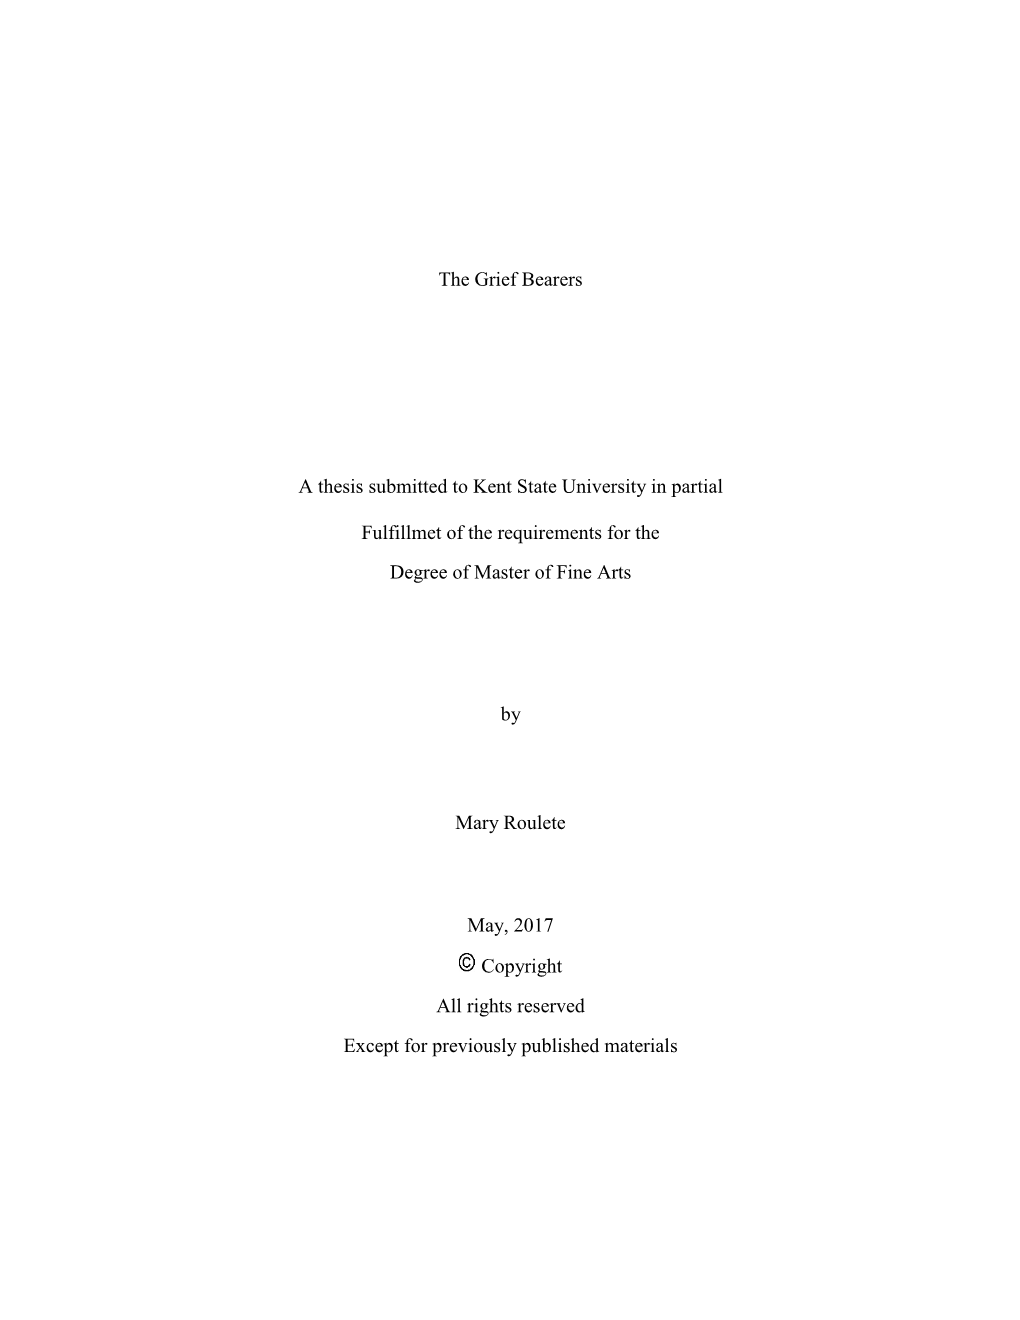 The Grief Bearers a Thesis Submitted to Kent State University in Partial